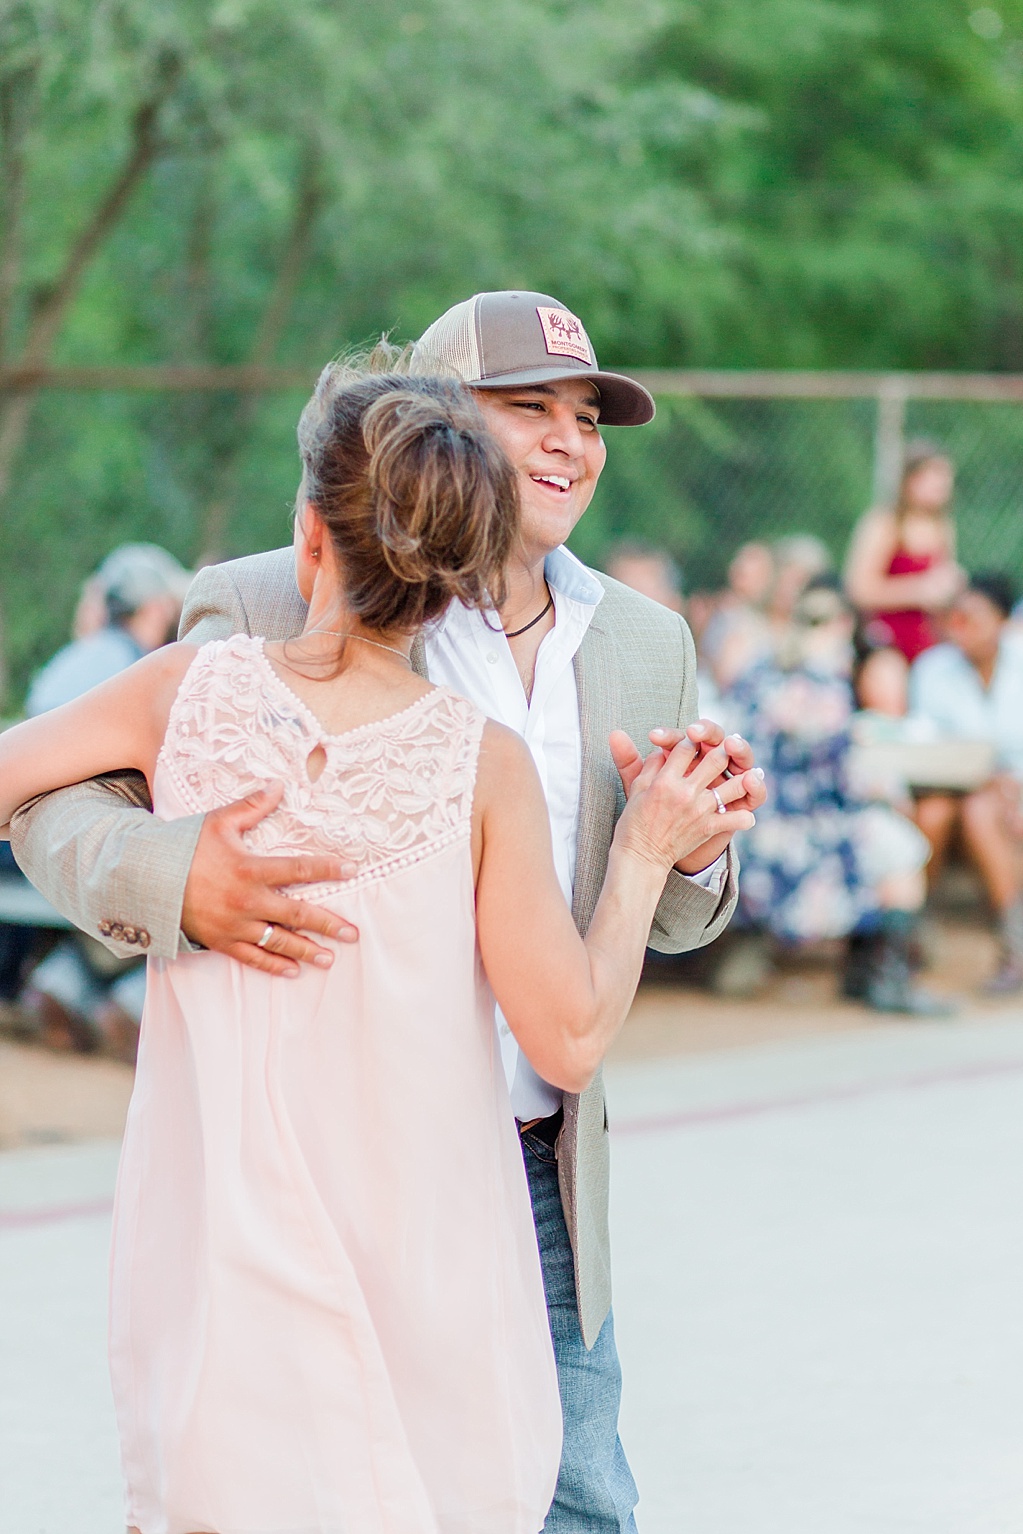 A labor day weekend wedding at Criders dance hall in Hunt Texas by Allison Jeffers 0056